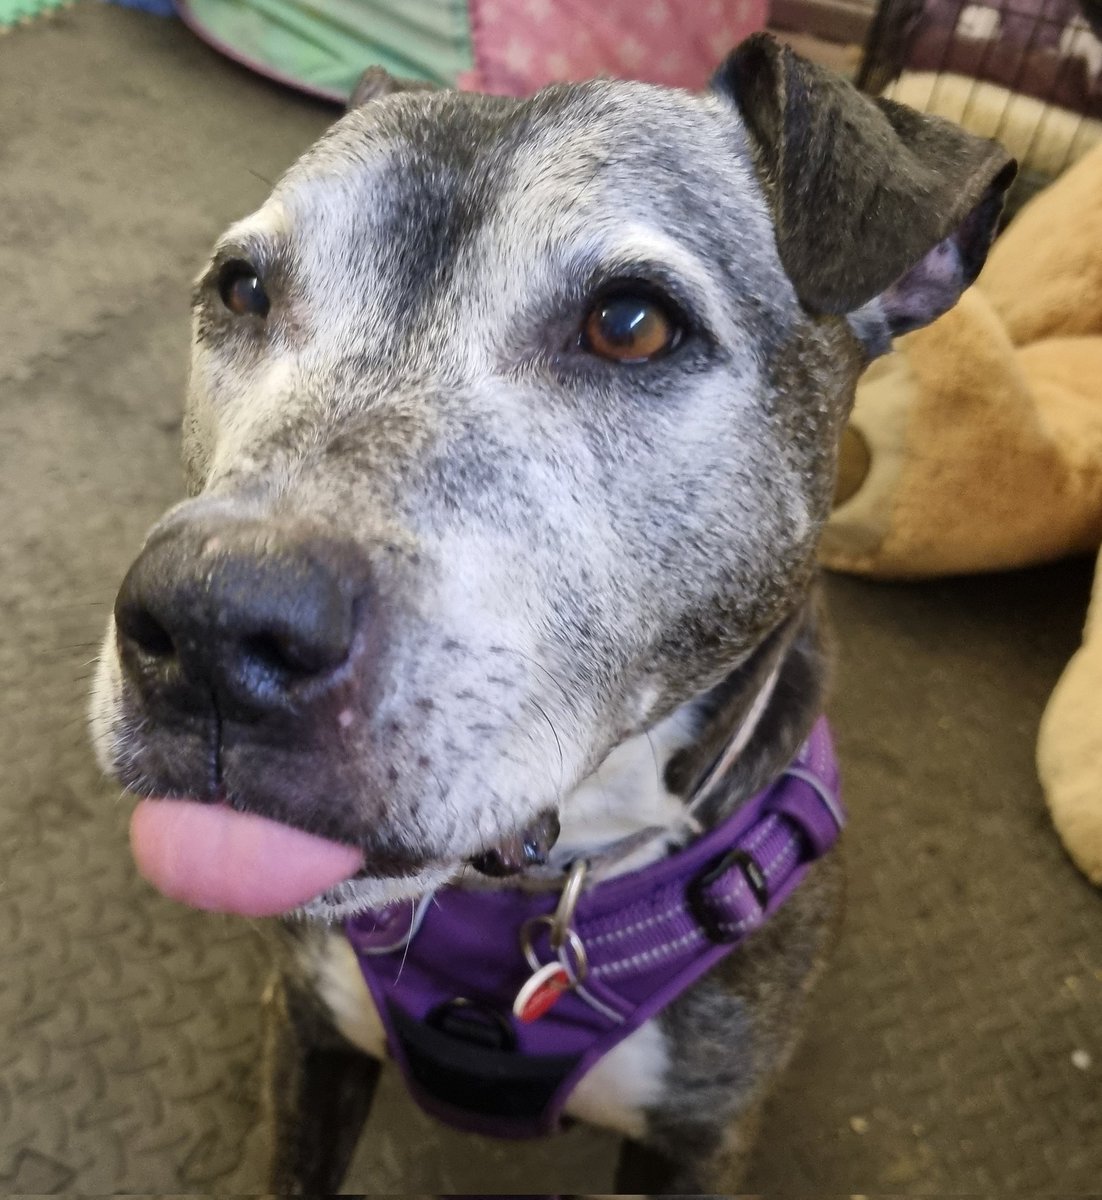 Happy #tongueouttuesday pals! Someone's nicked me right ear, if yoo find it can yoo send it me back pleeze!! 😅 Hope yoo is all well n haffing a nice day, I is off for walkies shortly wiff me Aunty so will catch up laters! TTFN AA 💙💙 #seniorstaffy seniorstaffyclub.co.uk/adopt-a-staffy… 💙💙